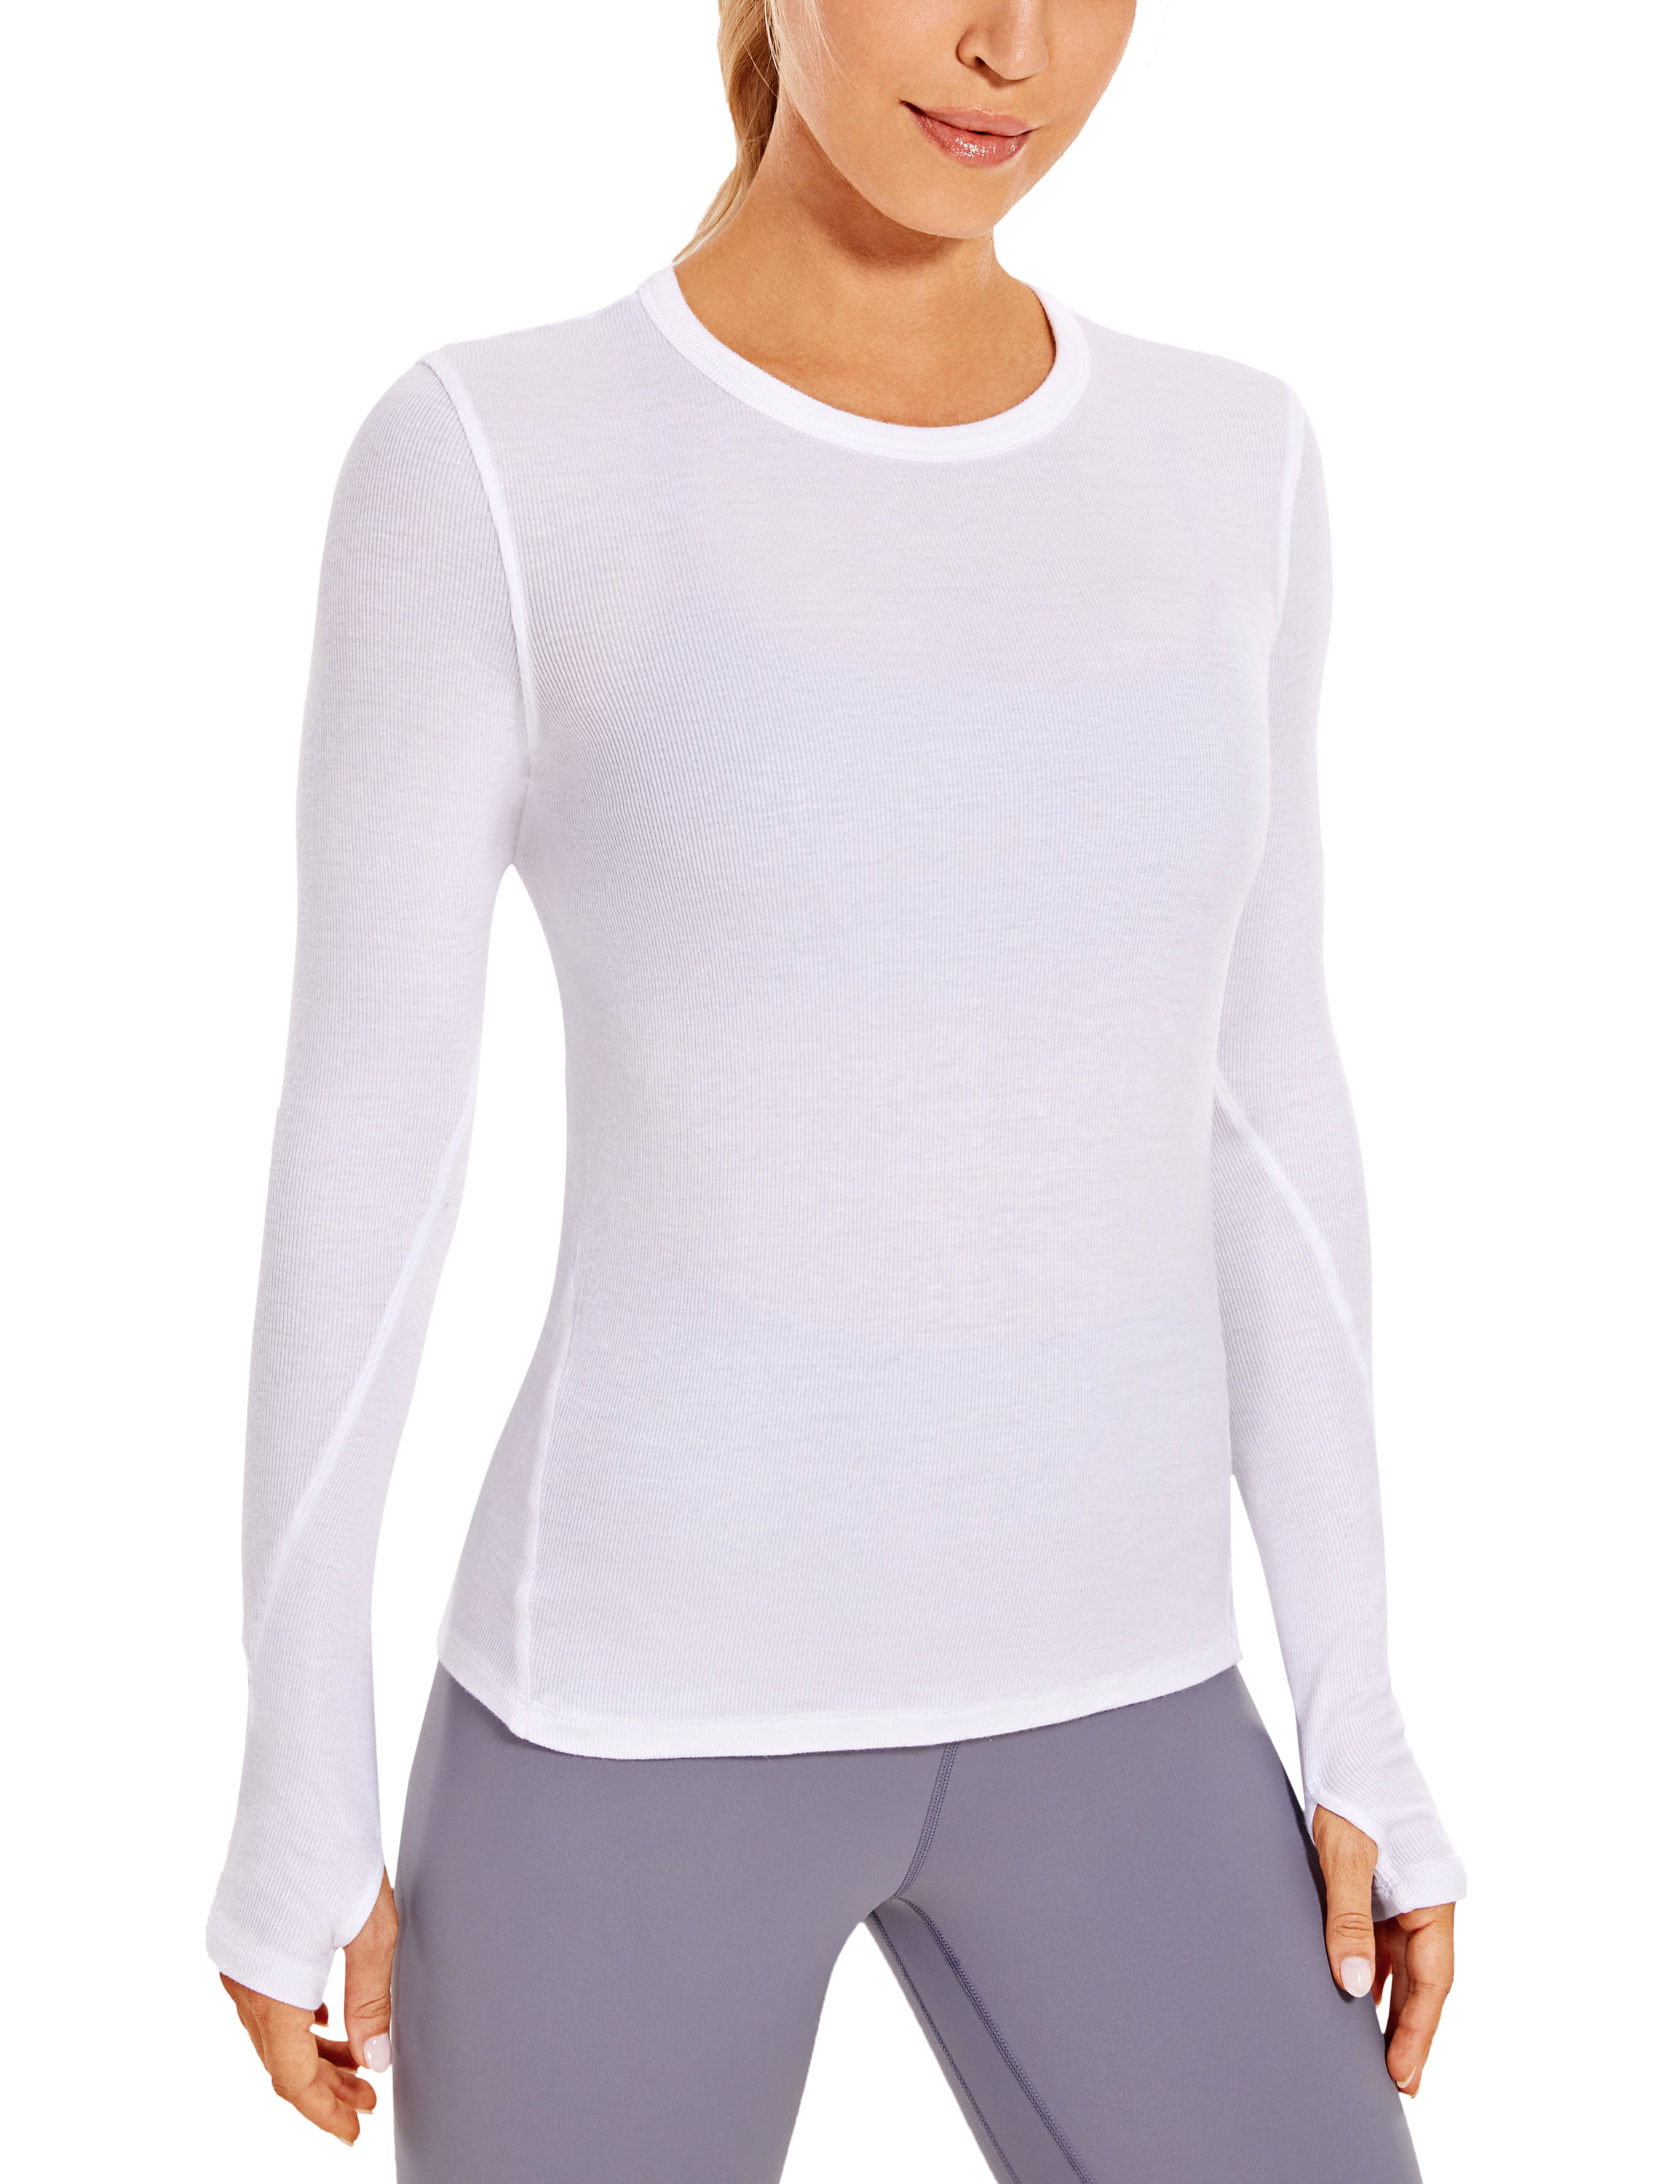 CRZ YOGA Womens Ribbed Slim Fit Athletic Shirt Long Sleeves Sports Workout Tops with Thumbholes